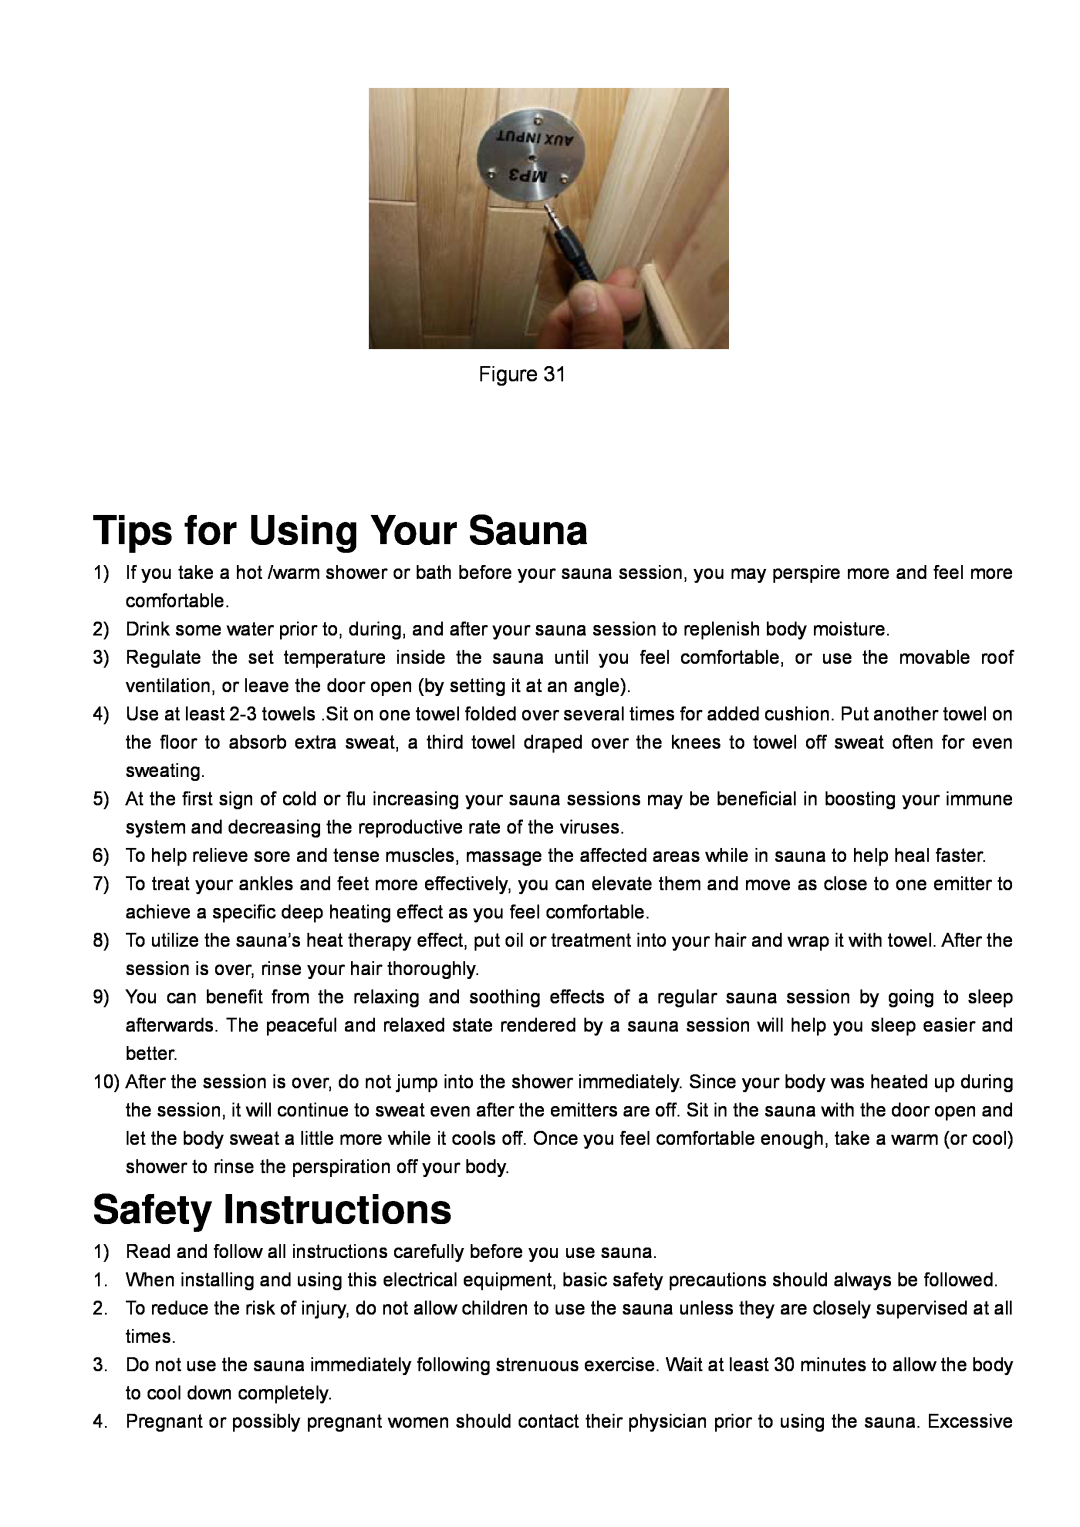 Keys Fitness BS-9101 owner manual Tips for Using Your Sauna, Safety Instructions 